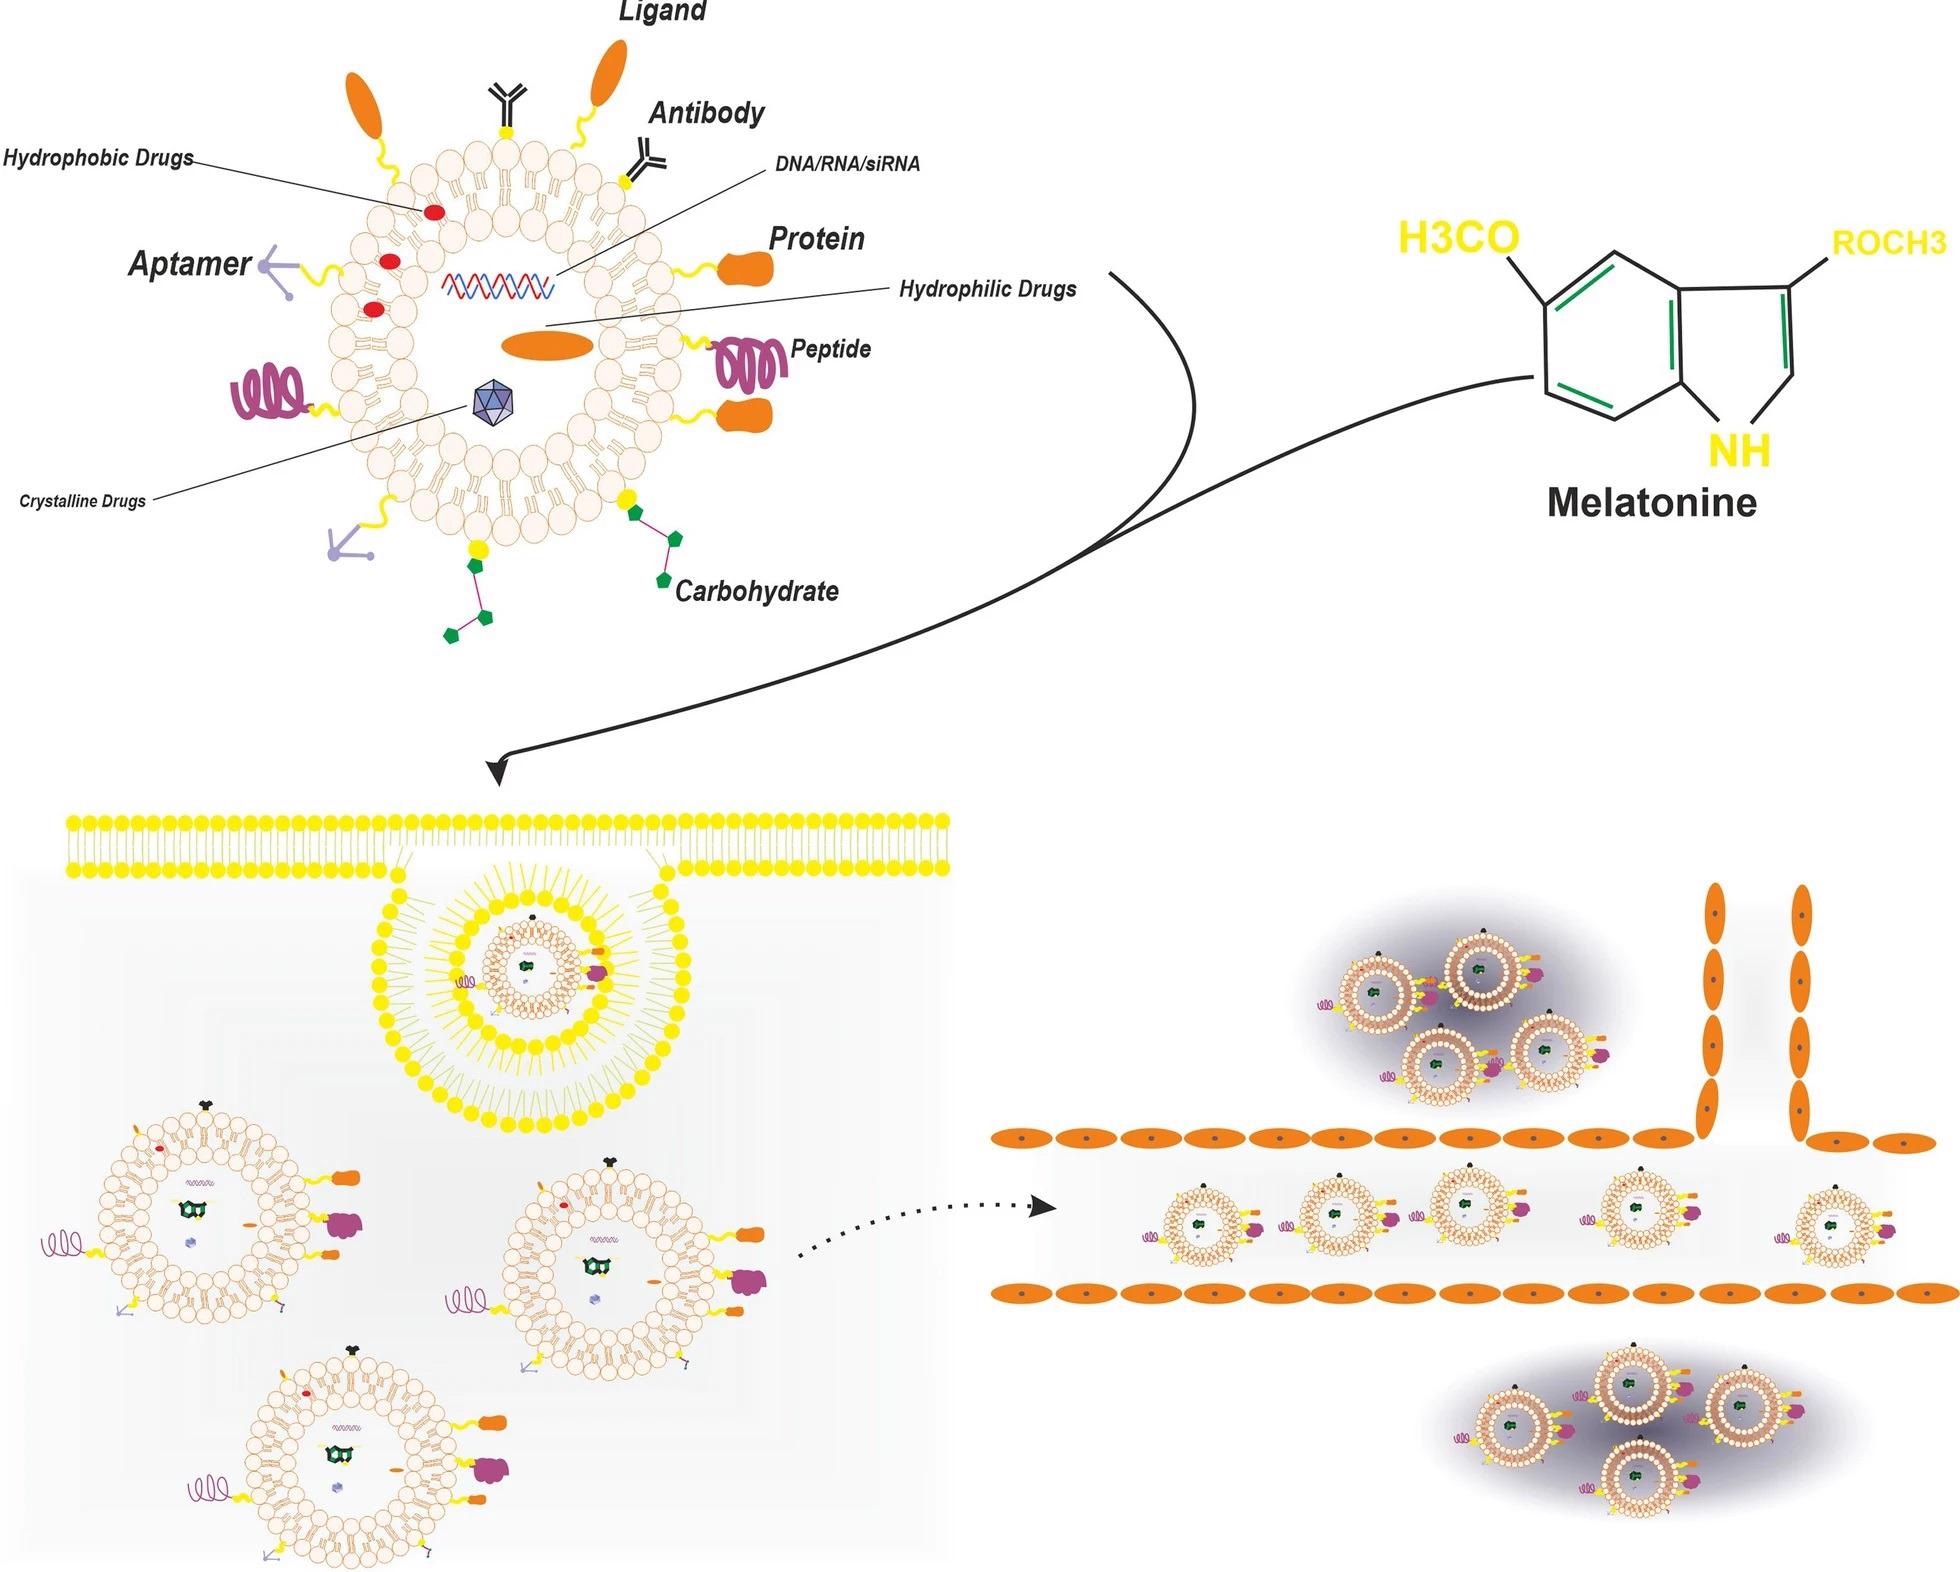 The figure shows the liposome as delivery vehicle for melatonin, liposome increase the transdermal delivery of melatonin and also increase distribution of melatonin in multiple part of body like cornea as fragile site